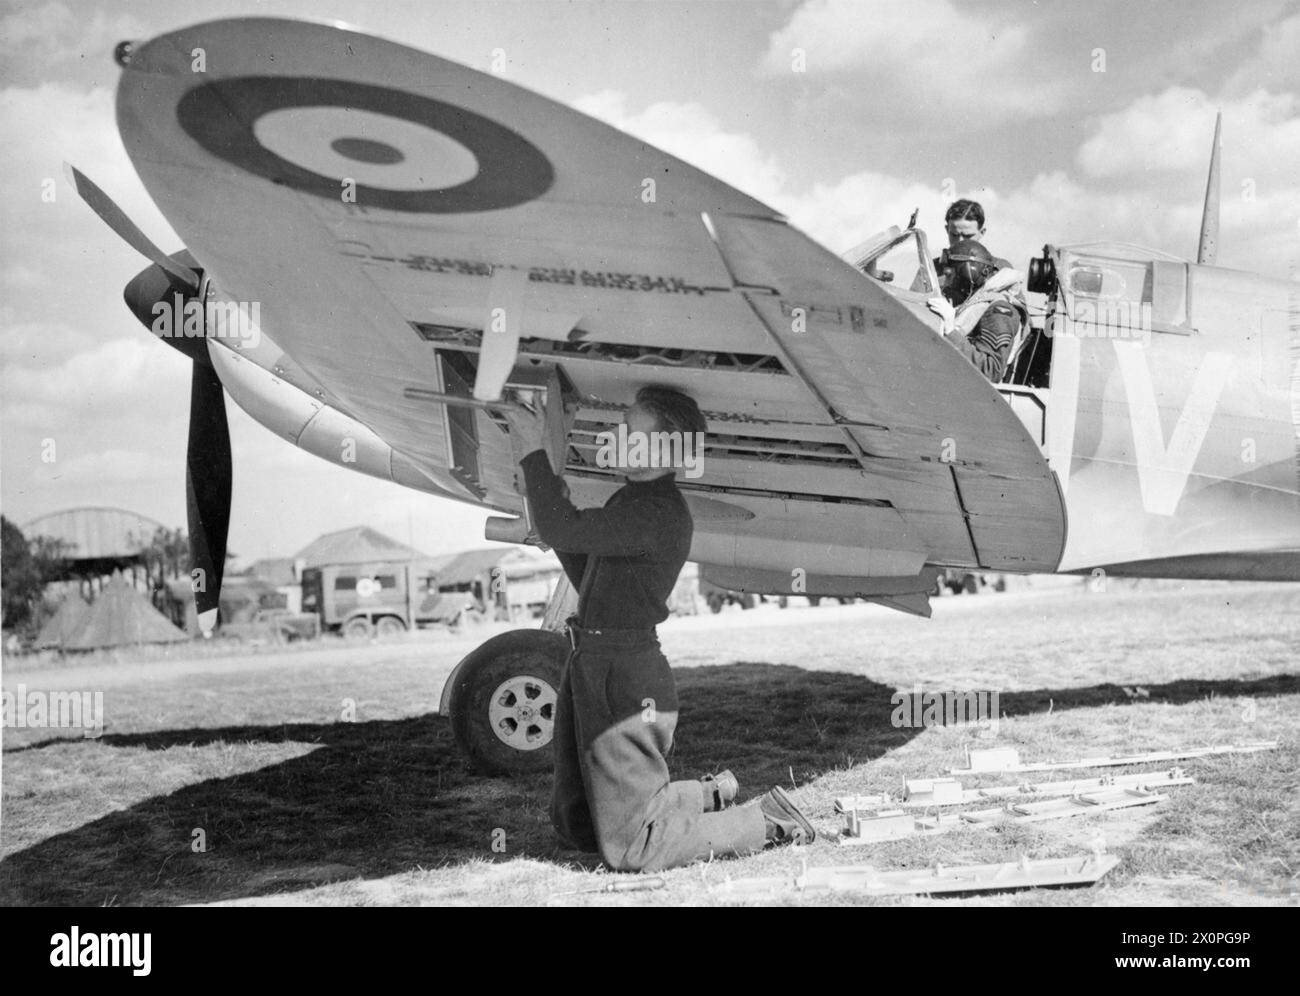 THE BATTLE OF BRITAIN 1940 - Armourer Fred Roberts re-arms Spitfire Mk Ia X4474 QV-I of No. 19 Squadron at Fowlmere, September 1940. The pilot, seated in his cockpit, is Sergeant Bernard Jennings Royal Air Force, 19 Squadron Stock Photo